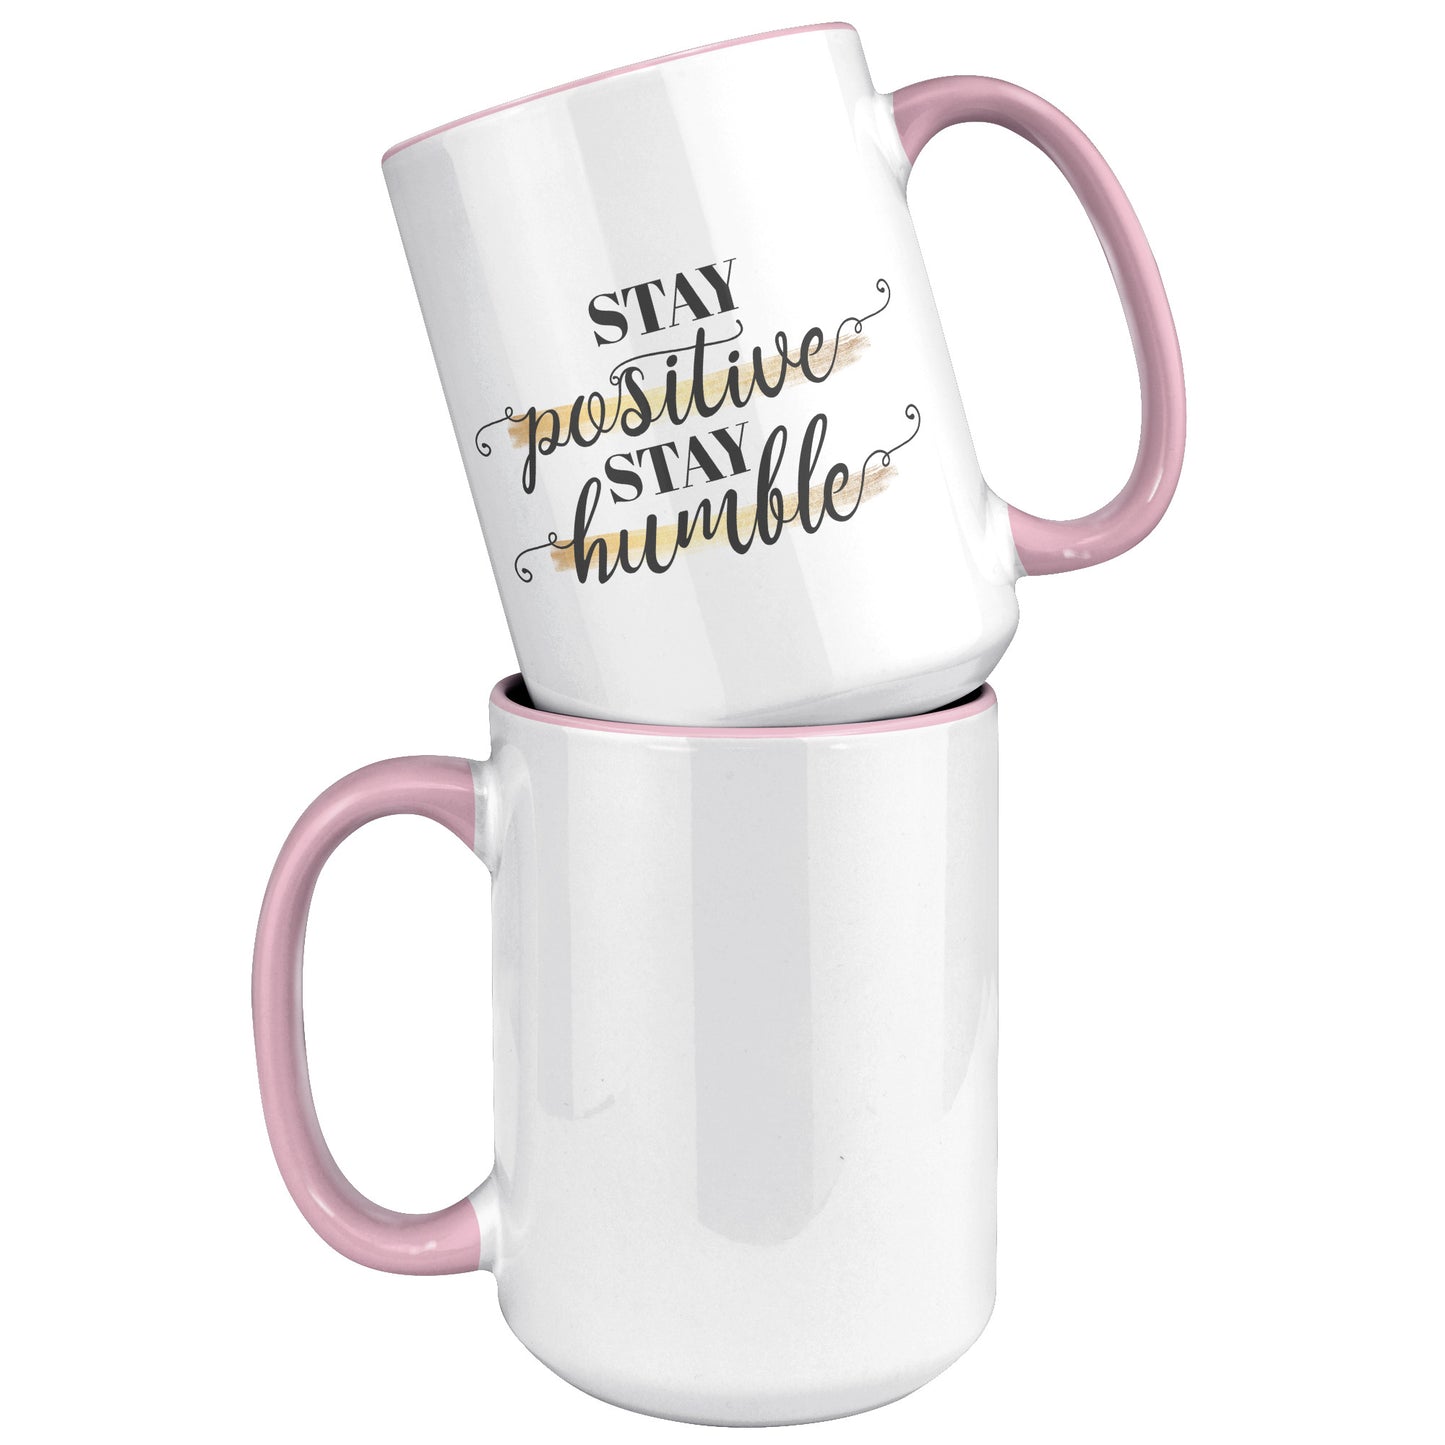 Stay Positive Stay Humble 15 oz Ceramic Accent Mug